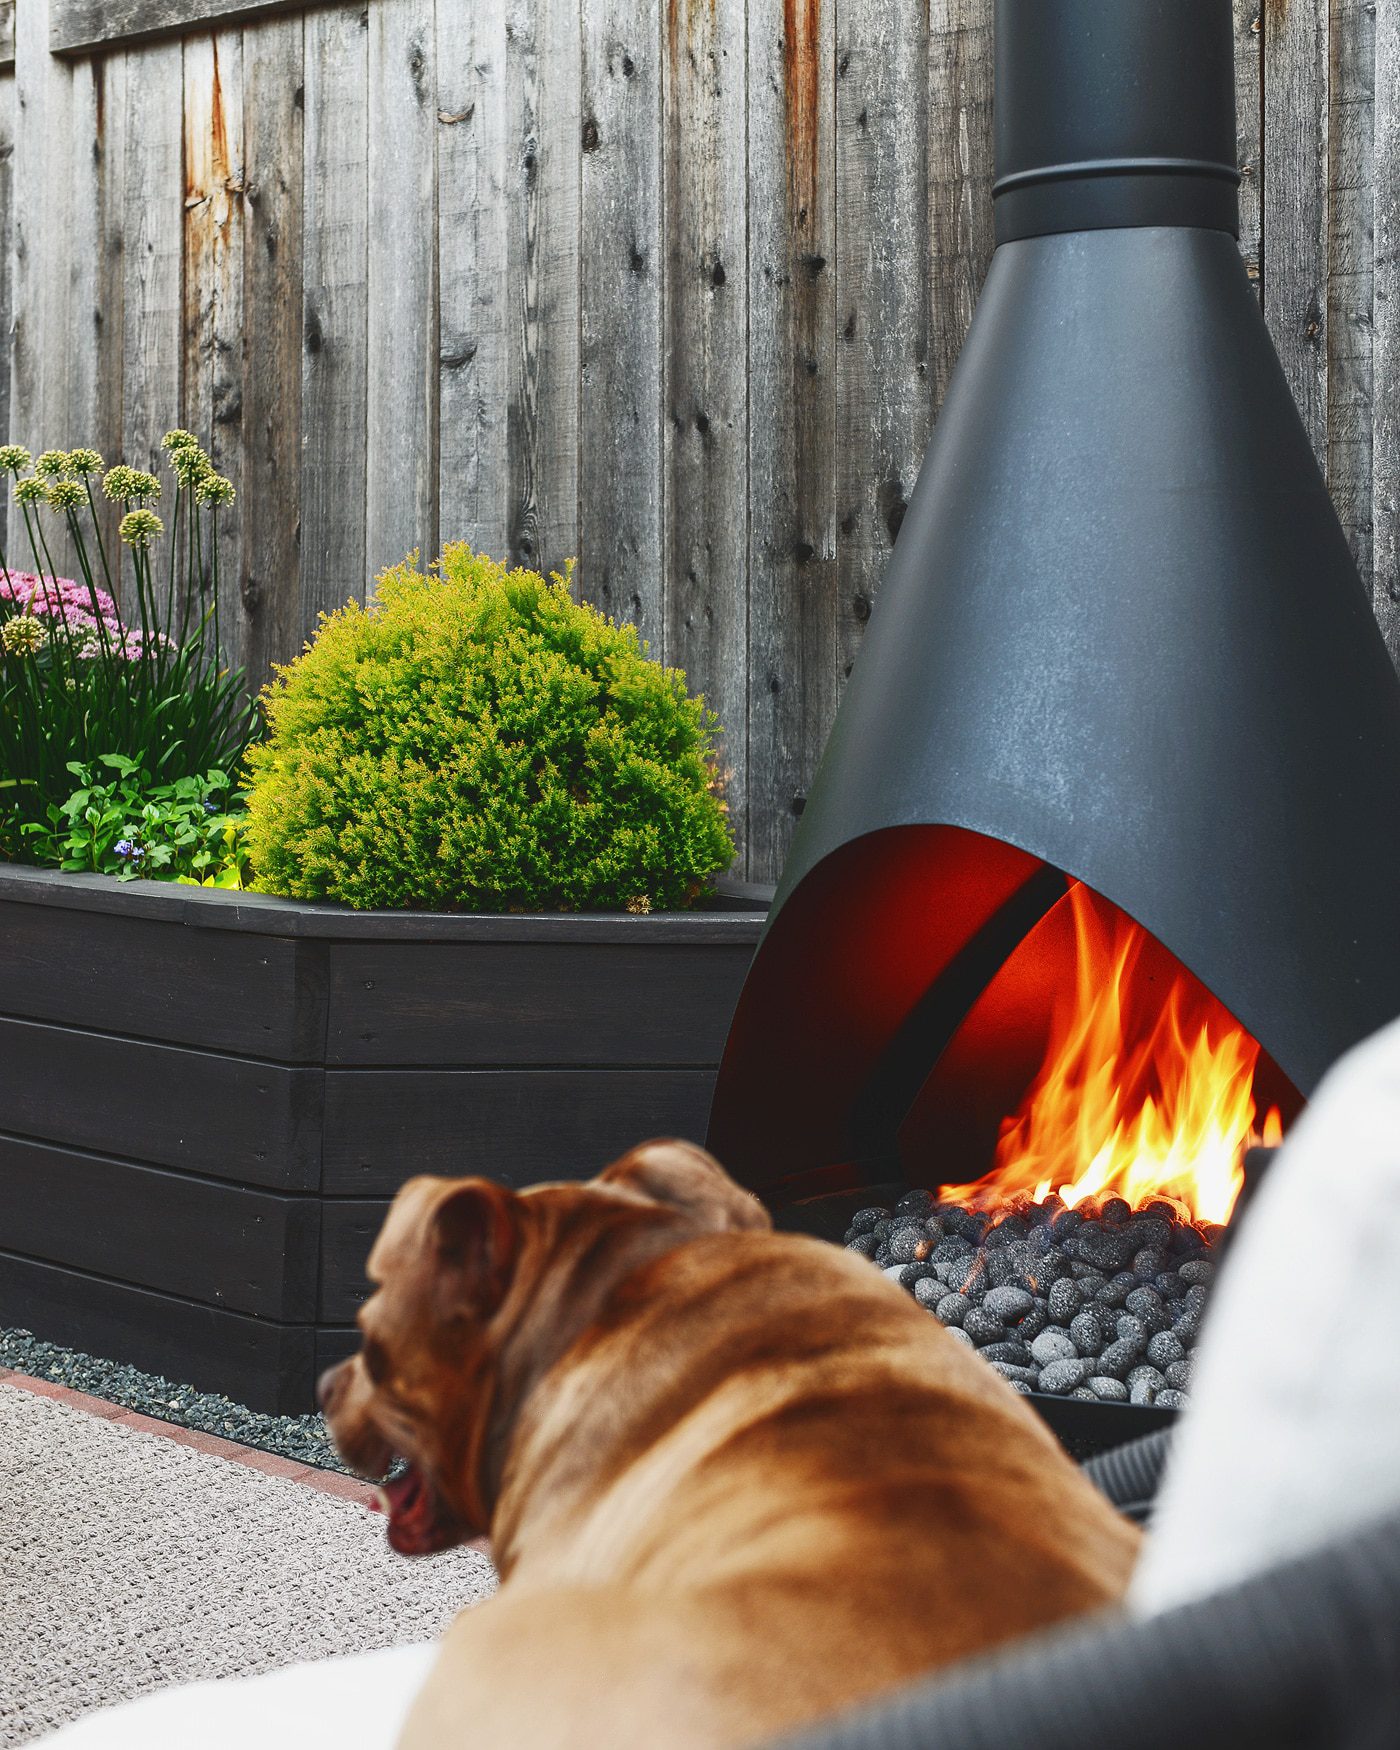 how to convert a fireplace to natural gas // via Yellow Brick Home